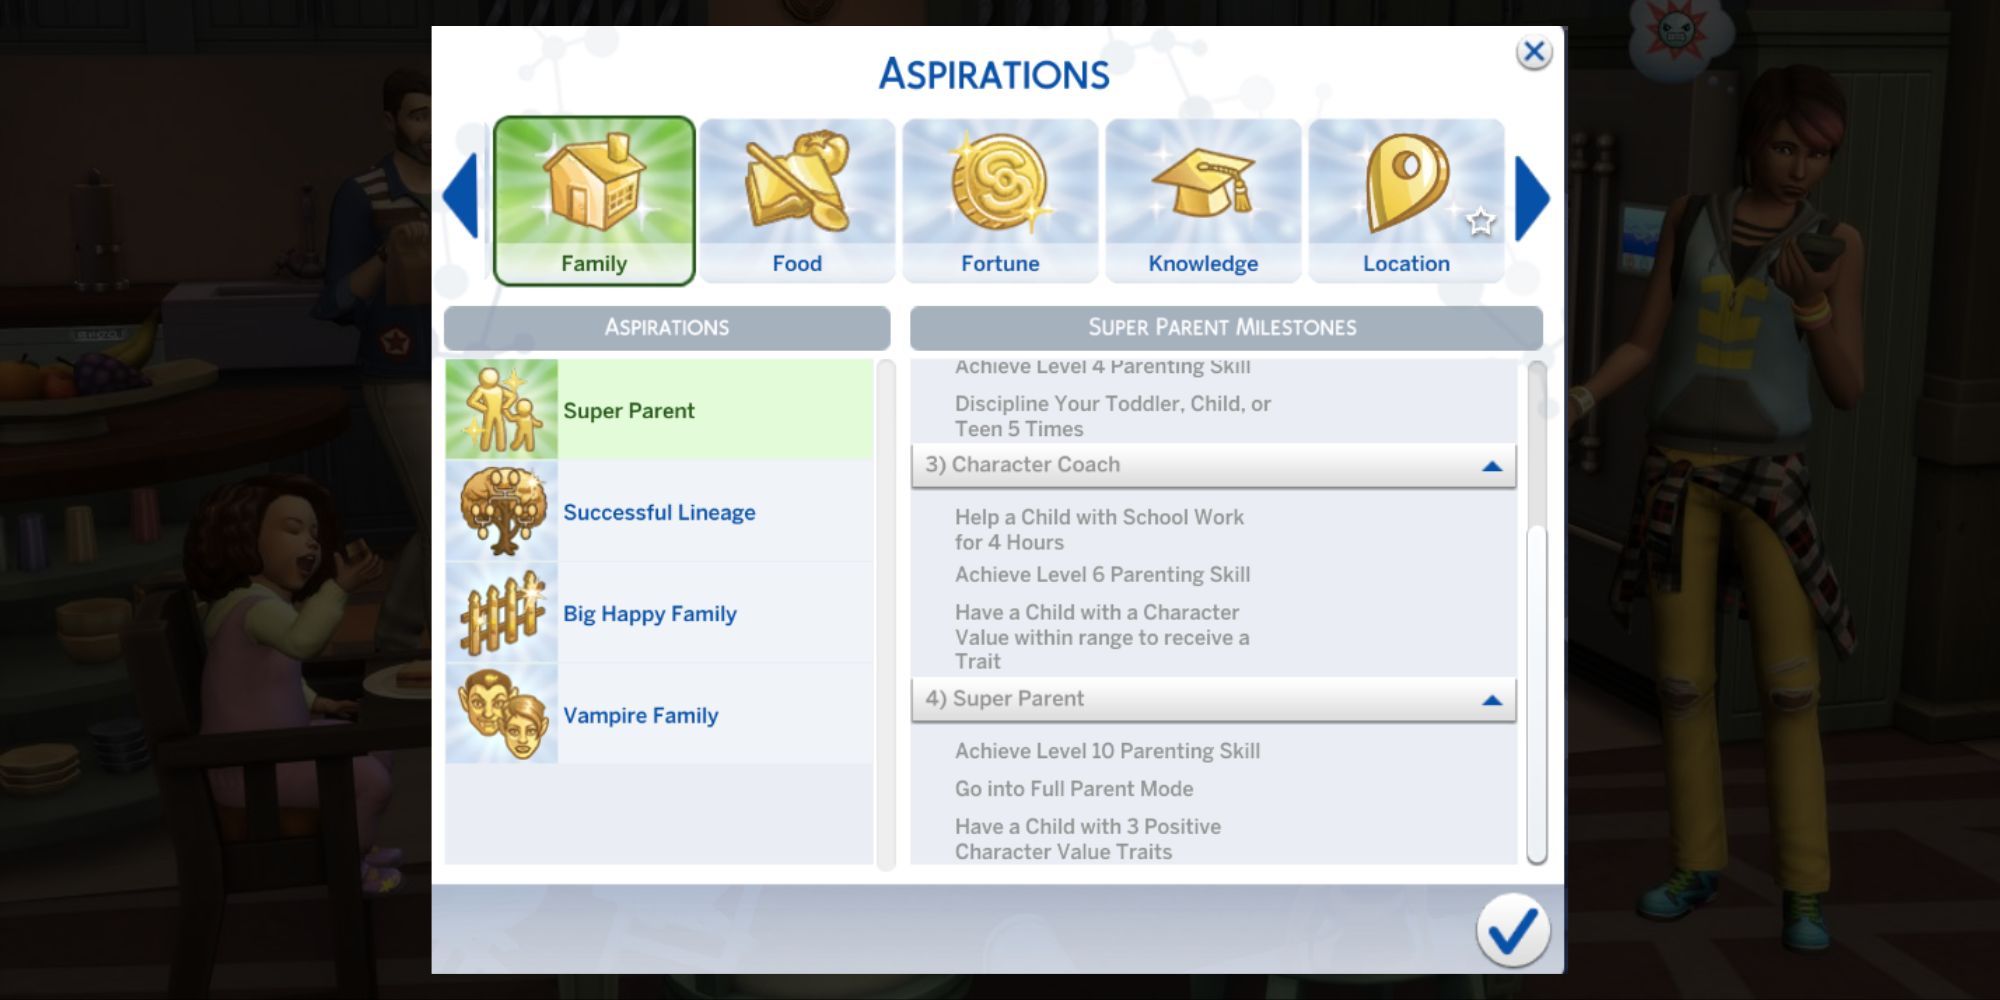 The Super Parent Aspiration in The Sims 4